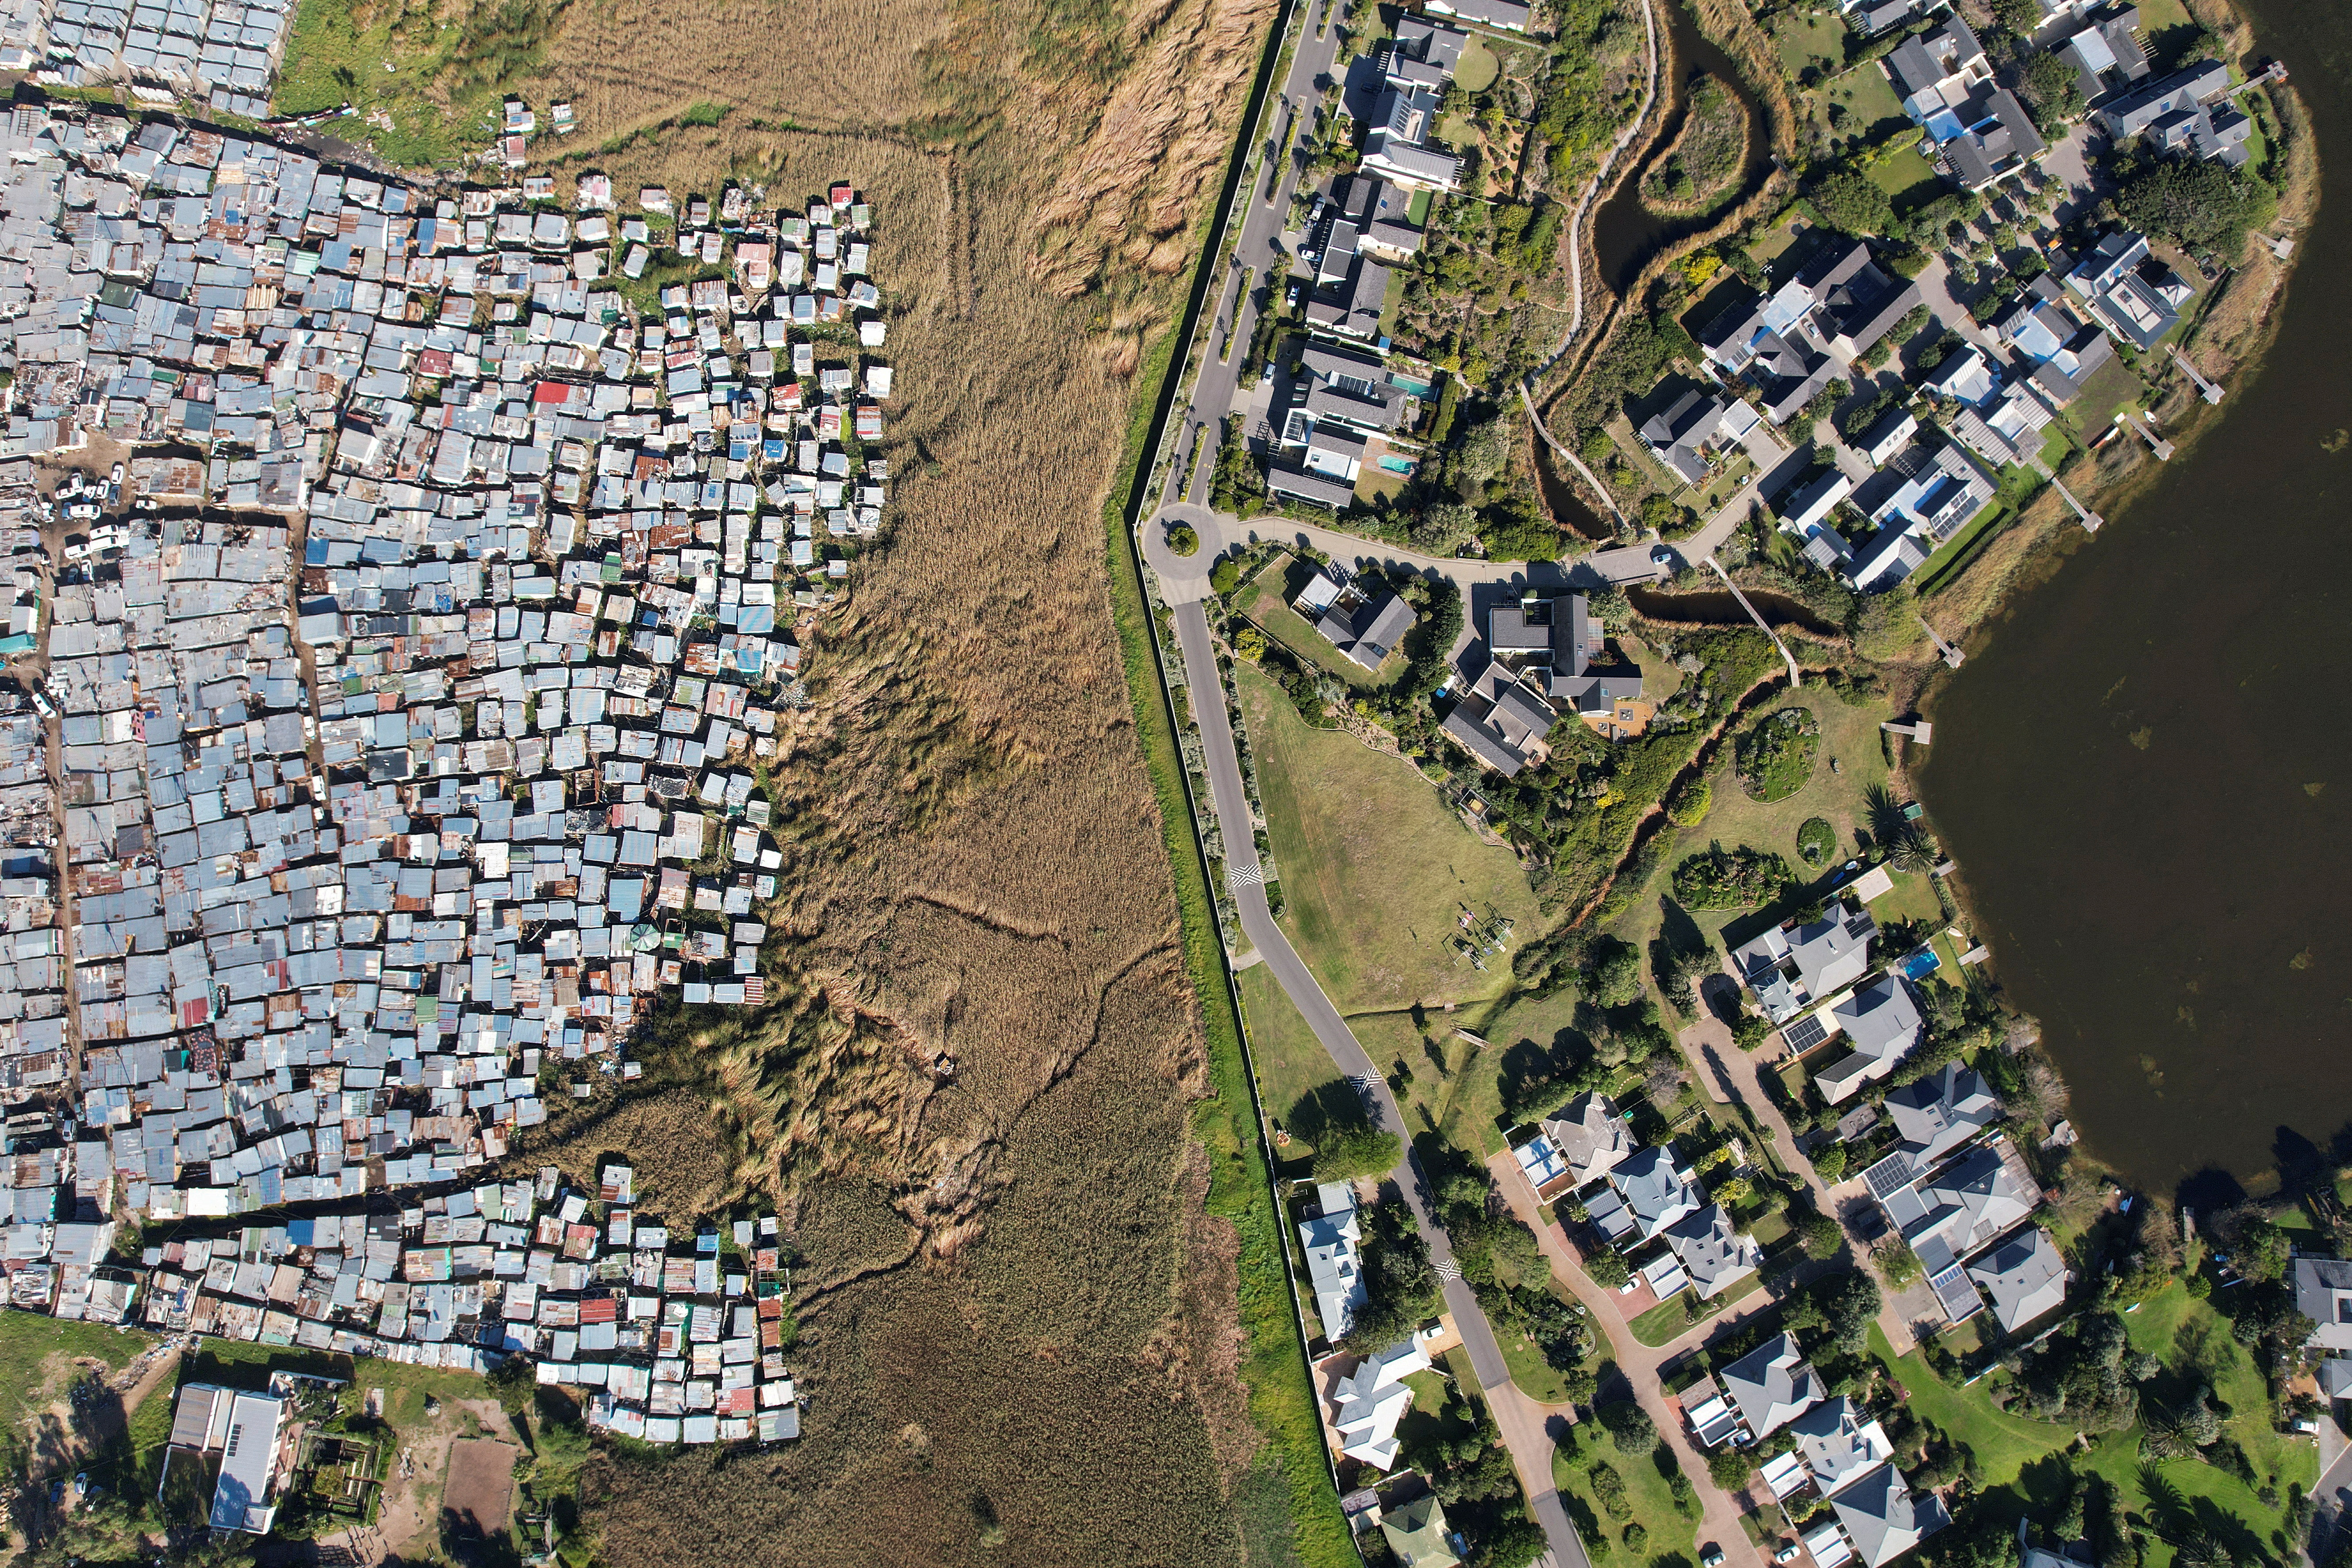 A drone Thirty years after the end of apartheid, equality eludes South Africaview shows informal shacks of the high-density suburb of Masiphumelele, in Cape Town